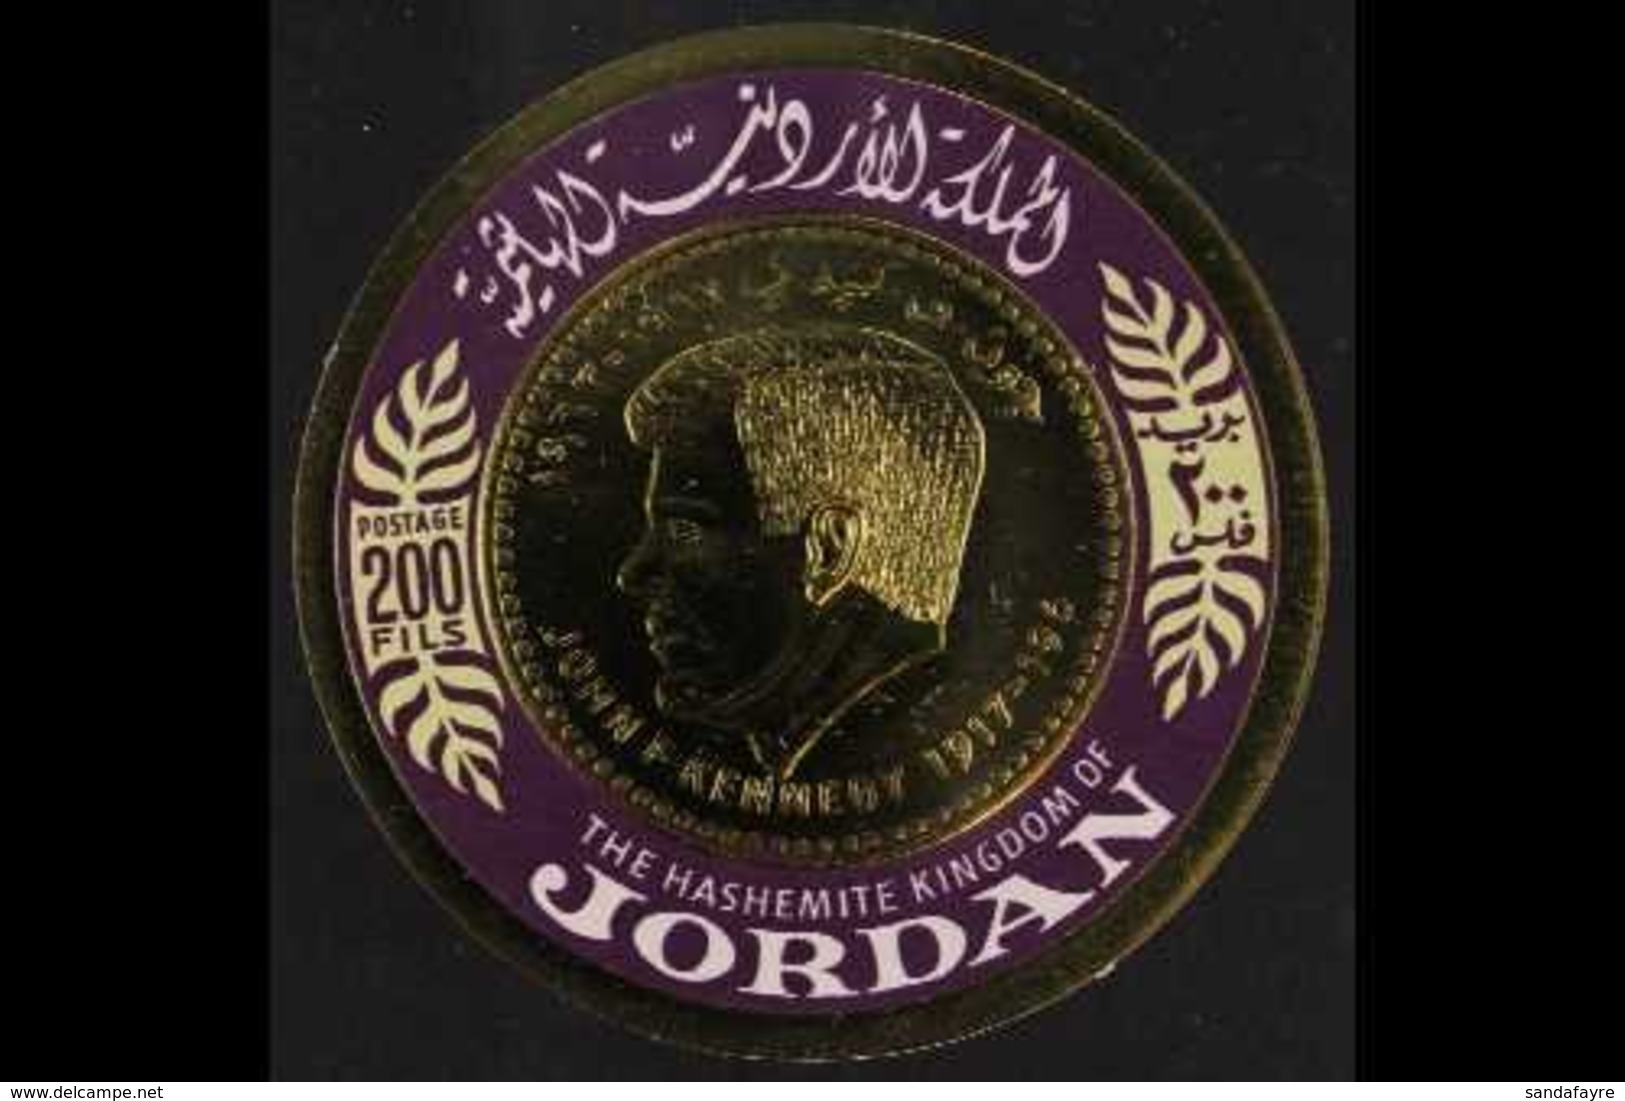 1967 GOLD COIN VARIETY 200f Purple & Bright Yellow Green (as SG 796e) "MISSING 6 VARIETY", Reads JOHN F. KENNEDY 1917-19 - Jordanie